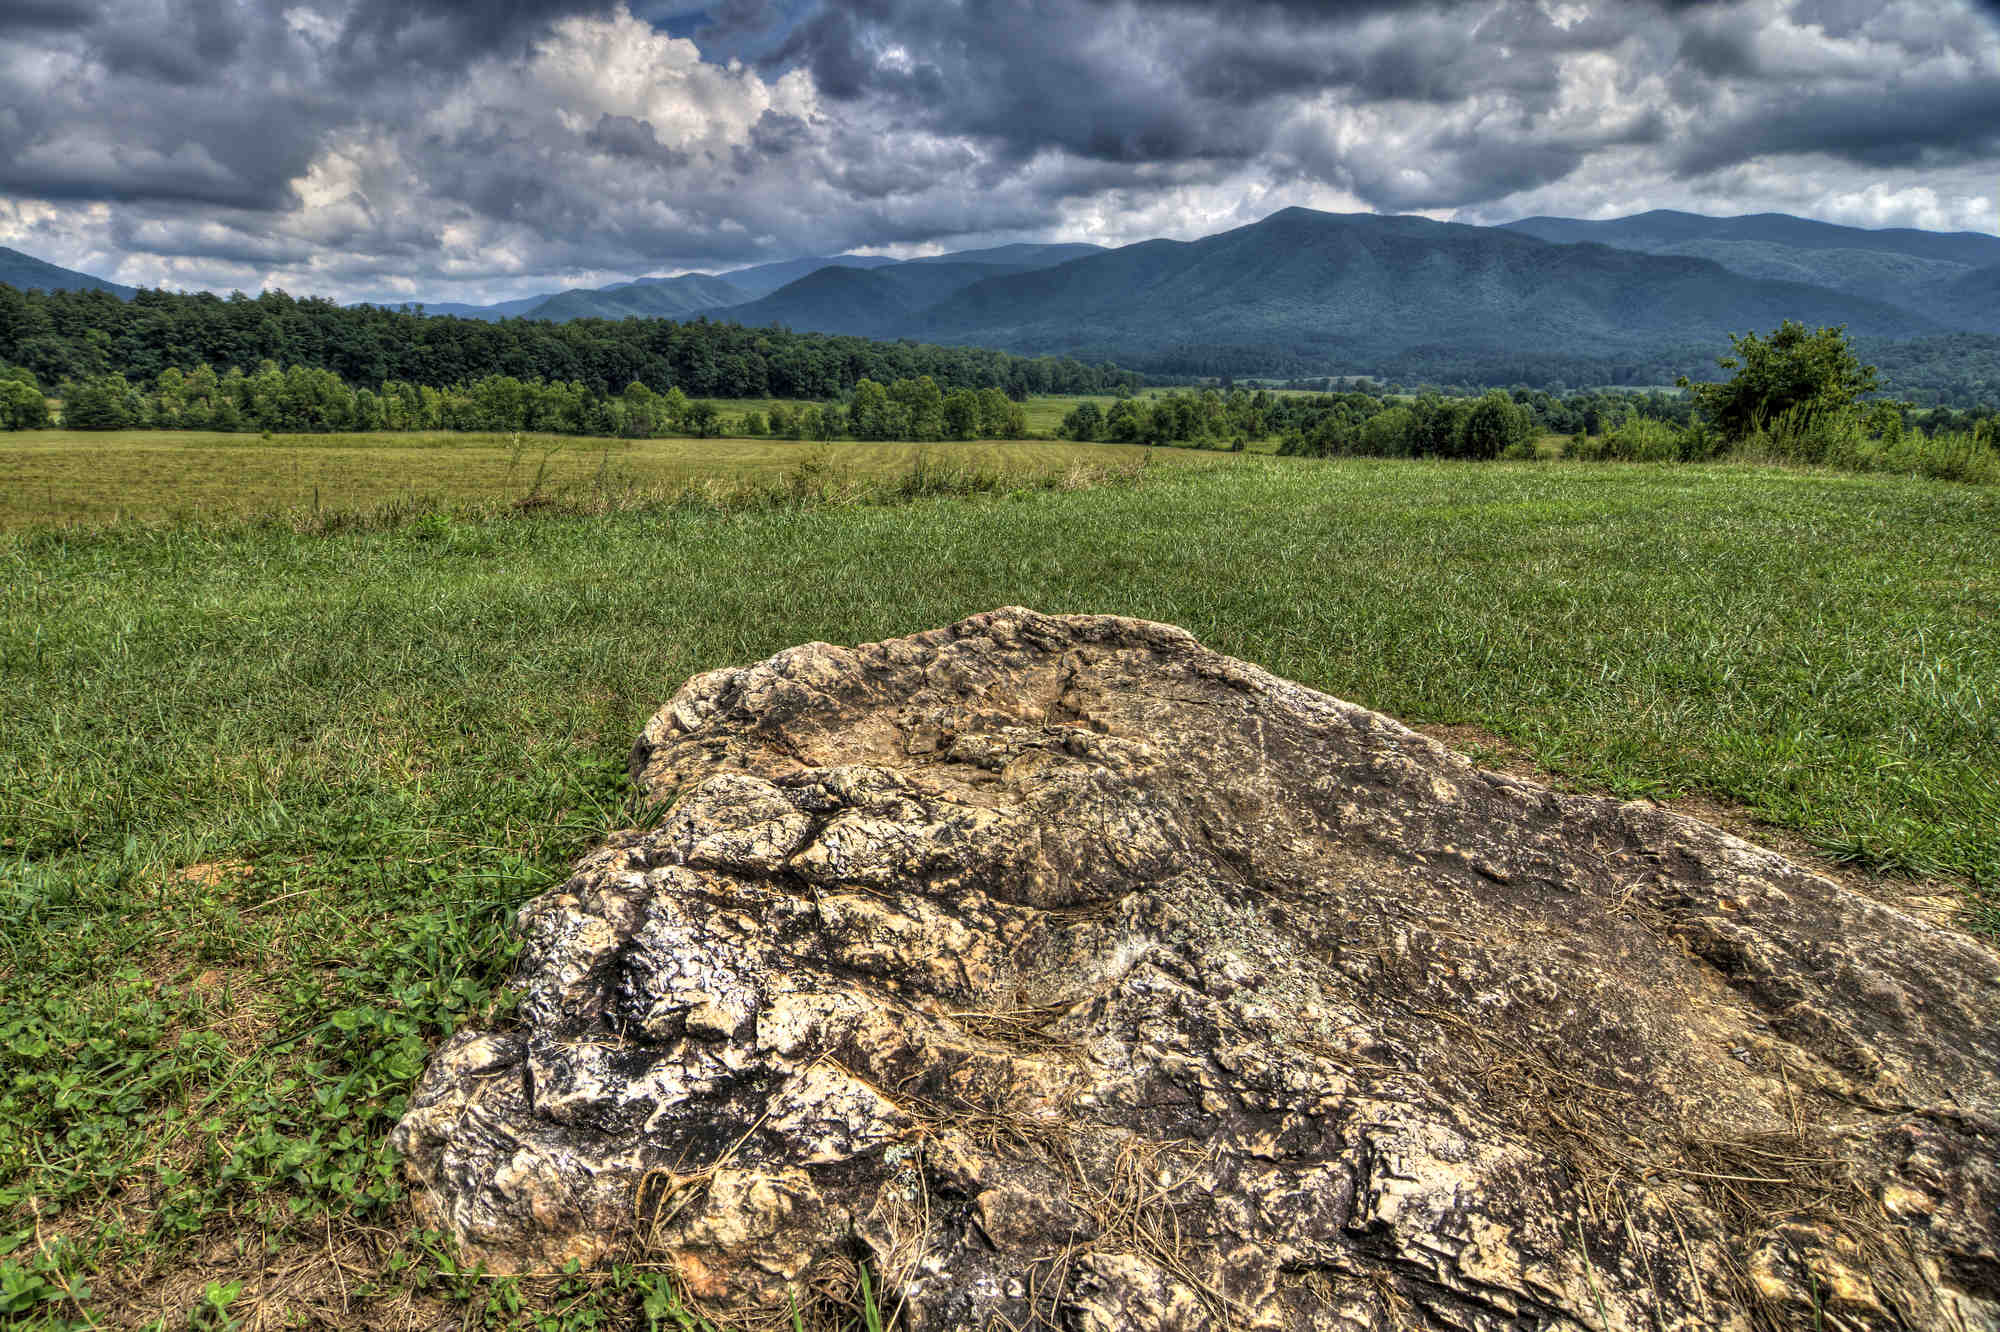 The view from a slight hill overlooking the green meadows of Cades Cove in Great Smoky Mountains National Park.